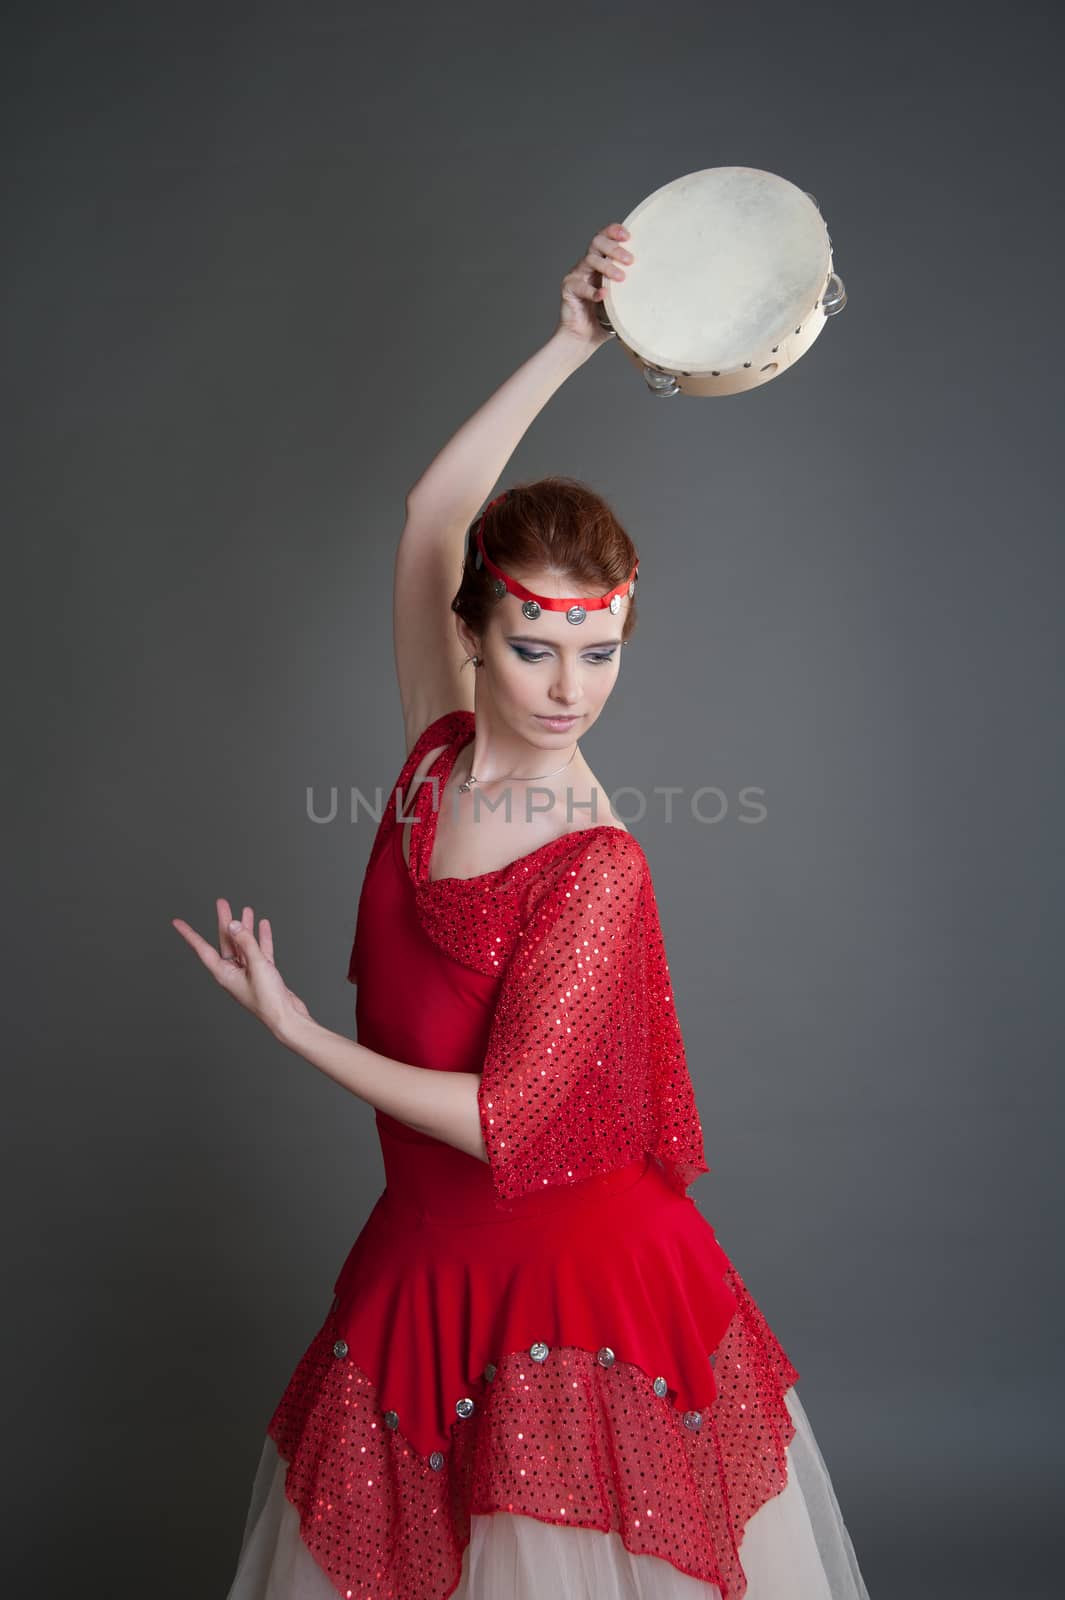 dancer in a red dress with a tambourine in Pointe on a grey background